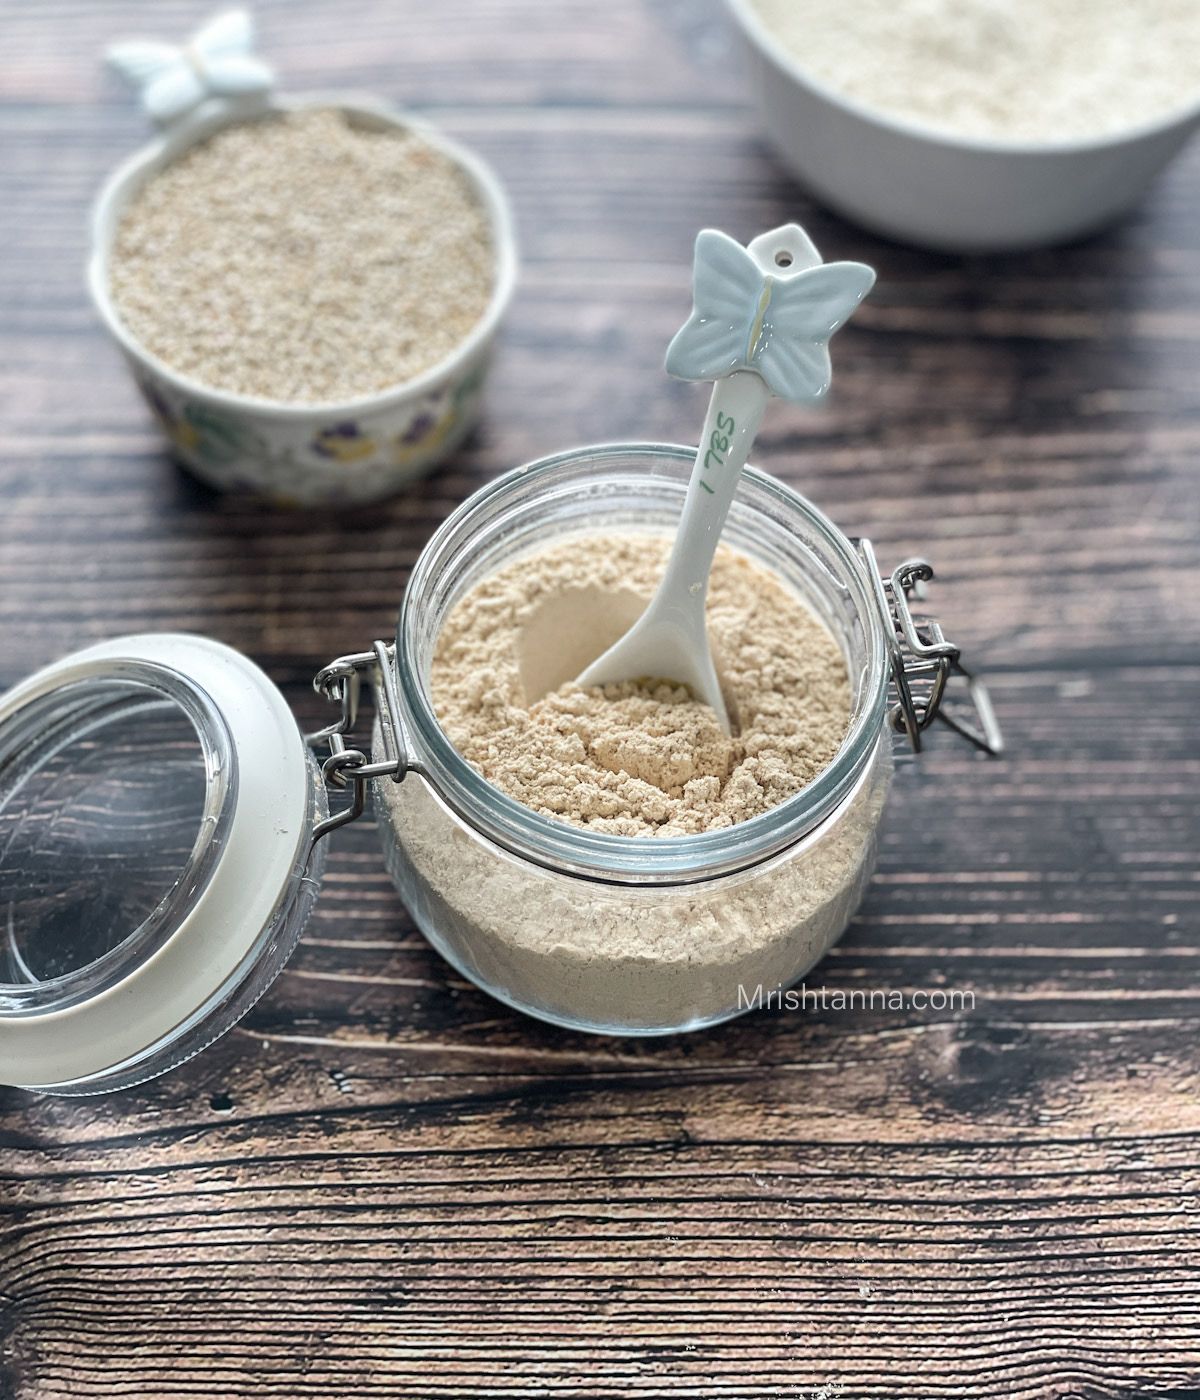 A jar is filled with quinoa flour.